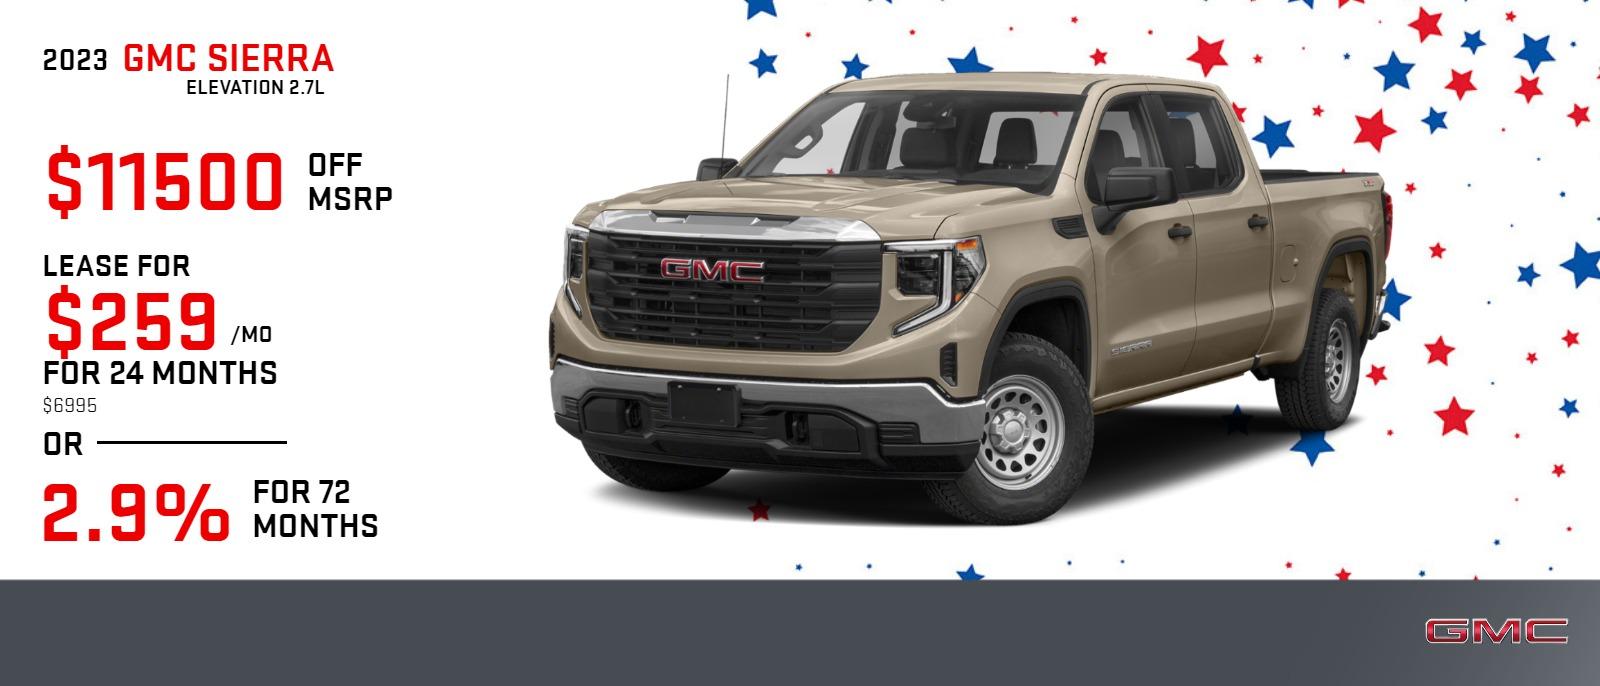 2024 SIERRA 1500 ELEVATION 2.7L
$259 | 24 MONTHS | 6995
SAVE UP TO $11500 OFF MSRP
2.9% APR FINANCING FOR UP TO 72 MONTHS